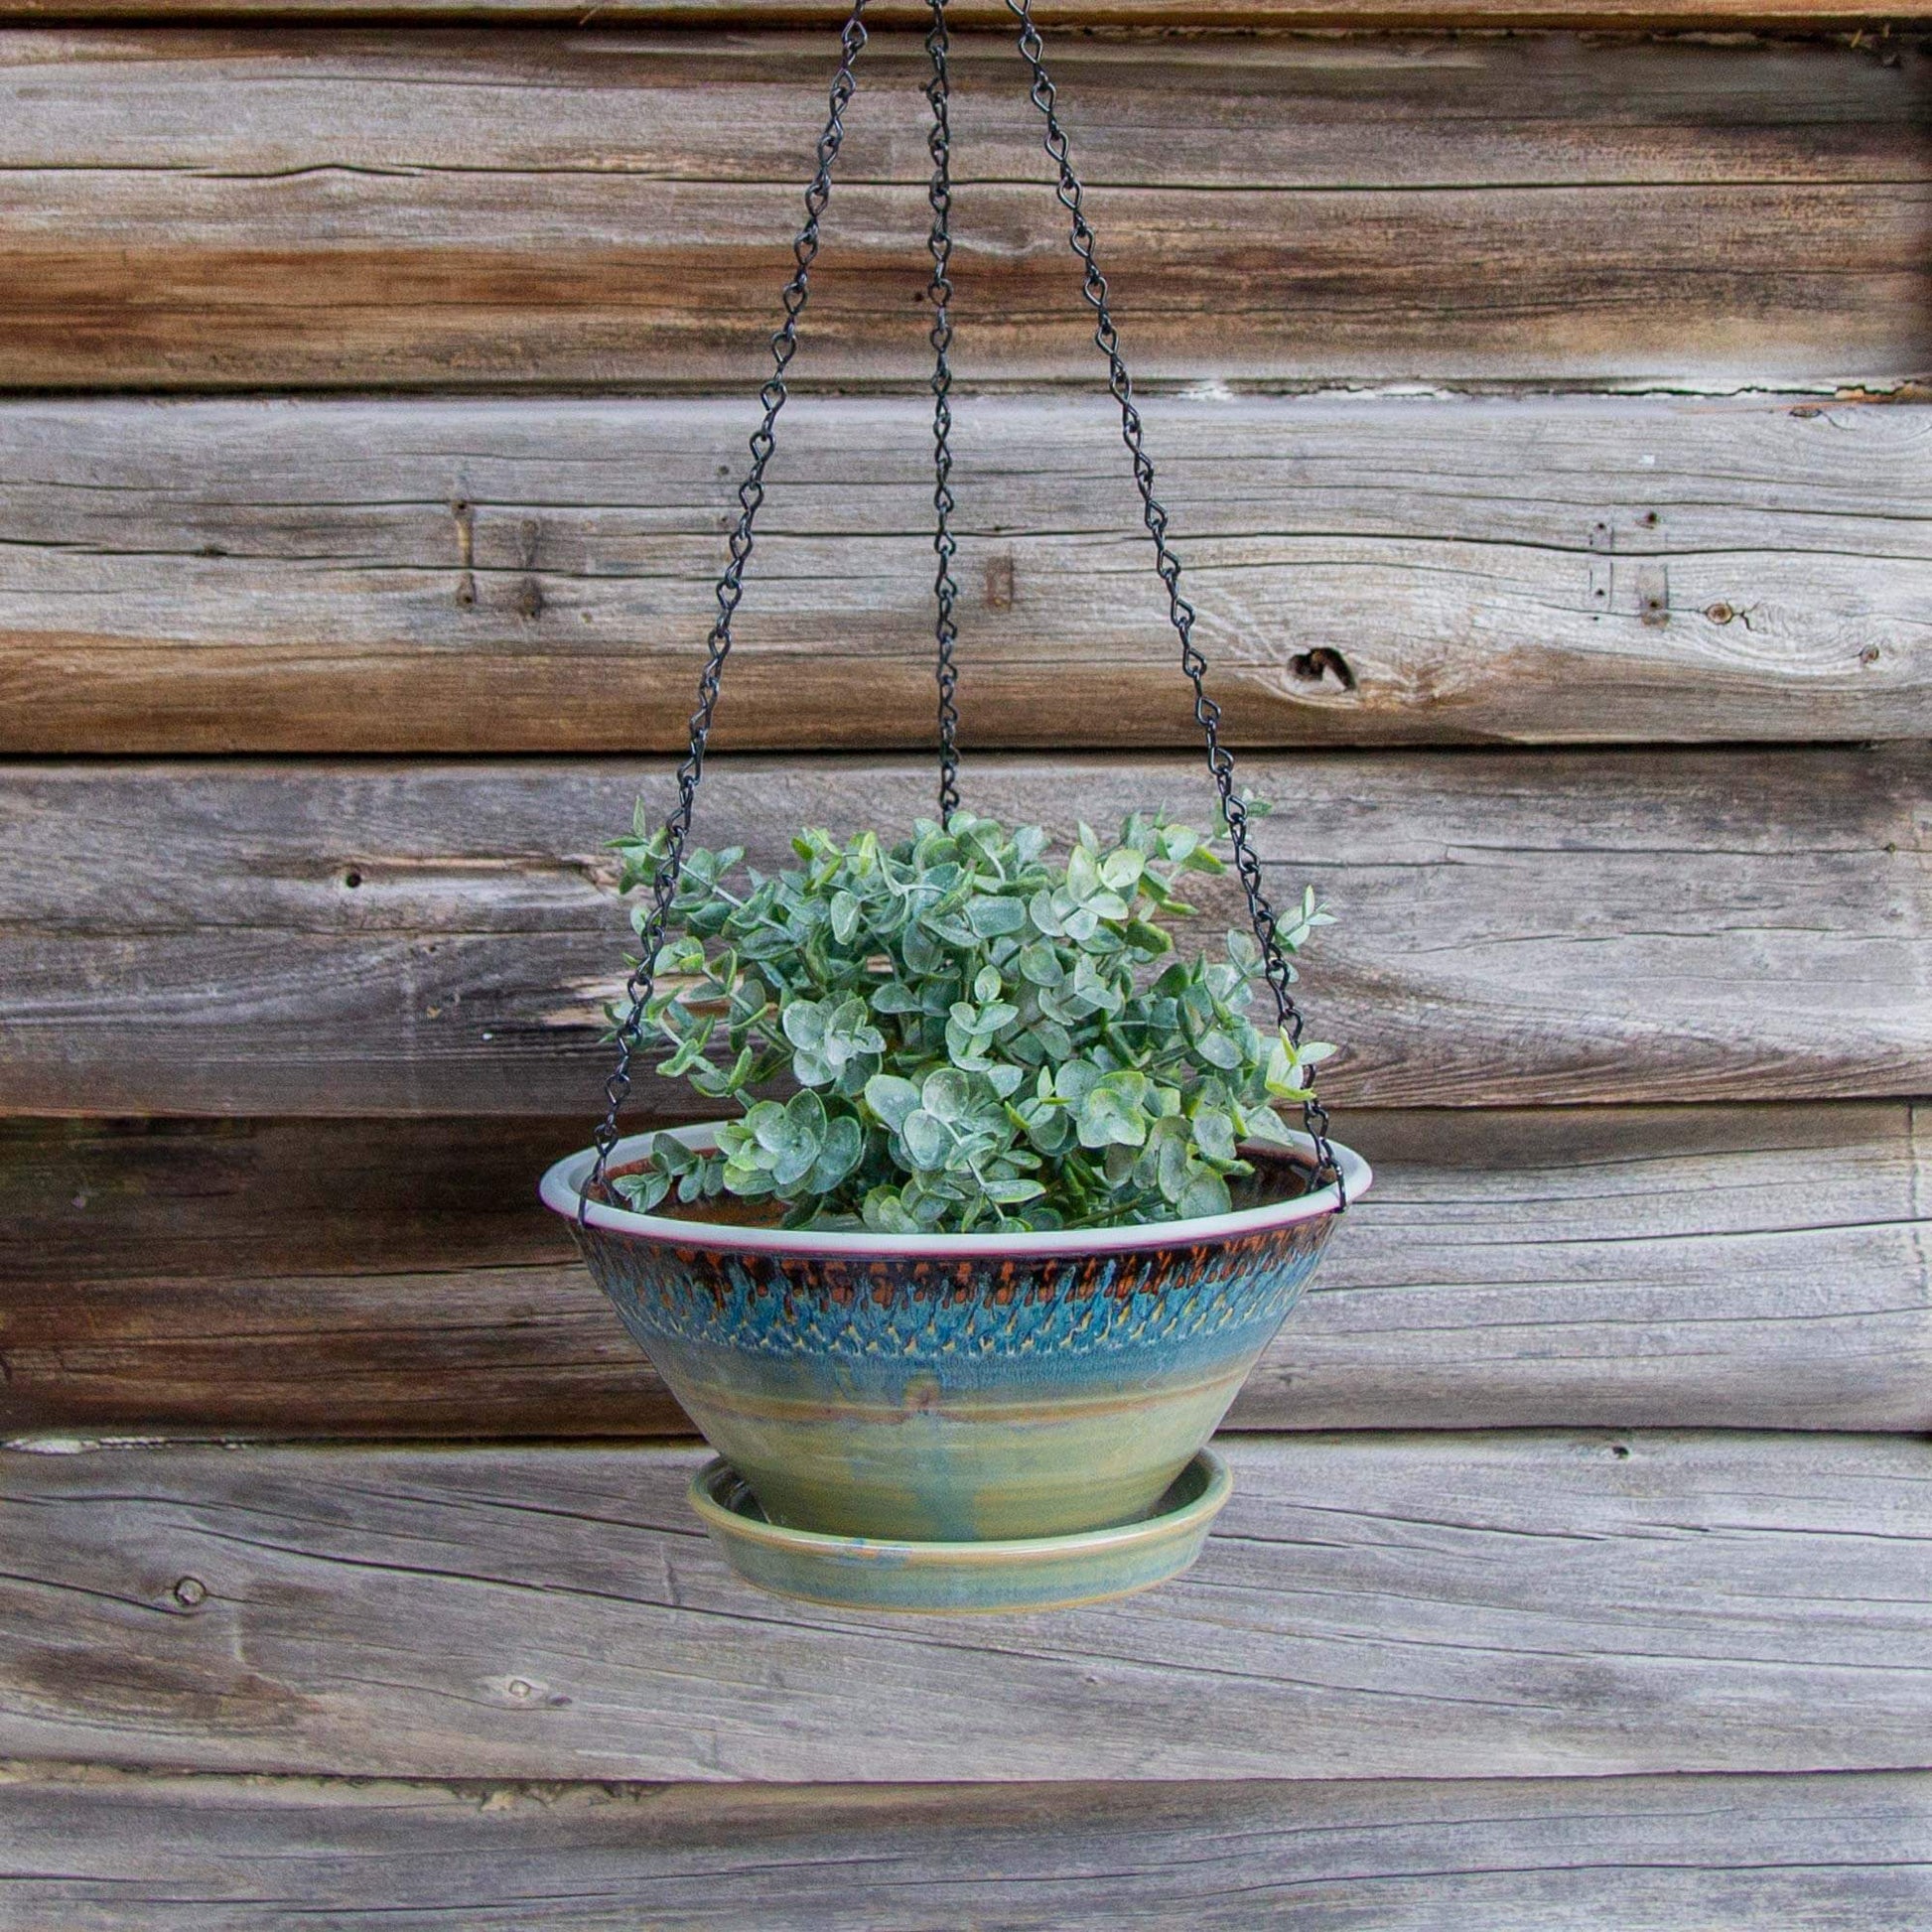 Handmade Pottery 9-1/2 Inch Hanging Planter in Purple Hamada pattern made by Georgetown Pottery in Maine